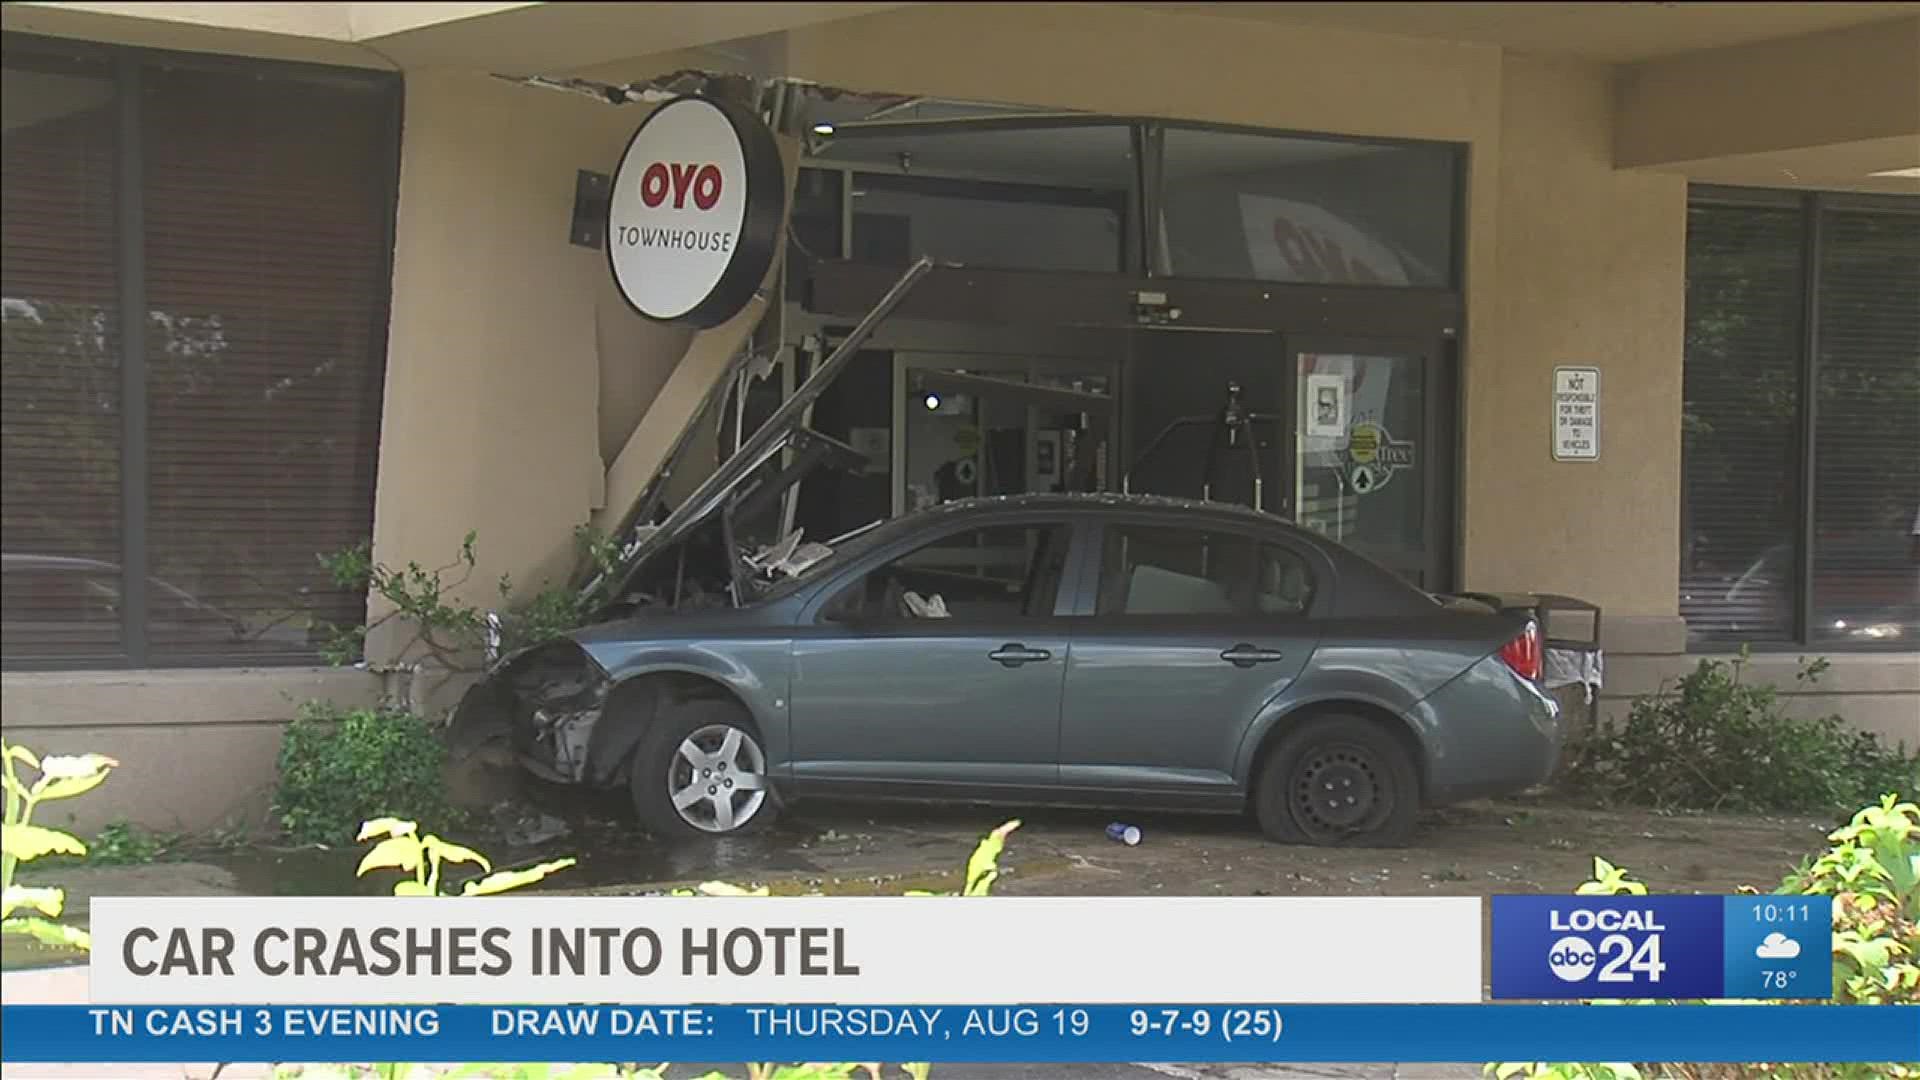 Damage to the front of the hotel and the 4-door sedan that smashed into it could be seen from the road.